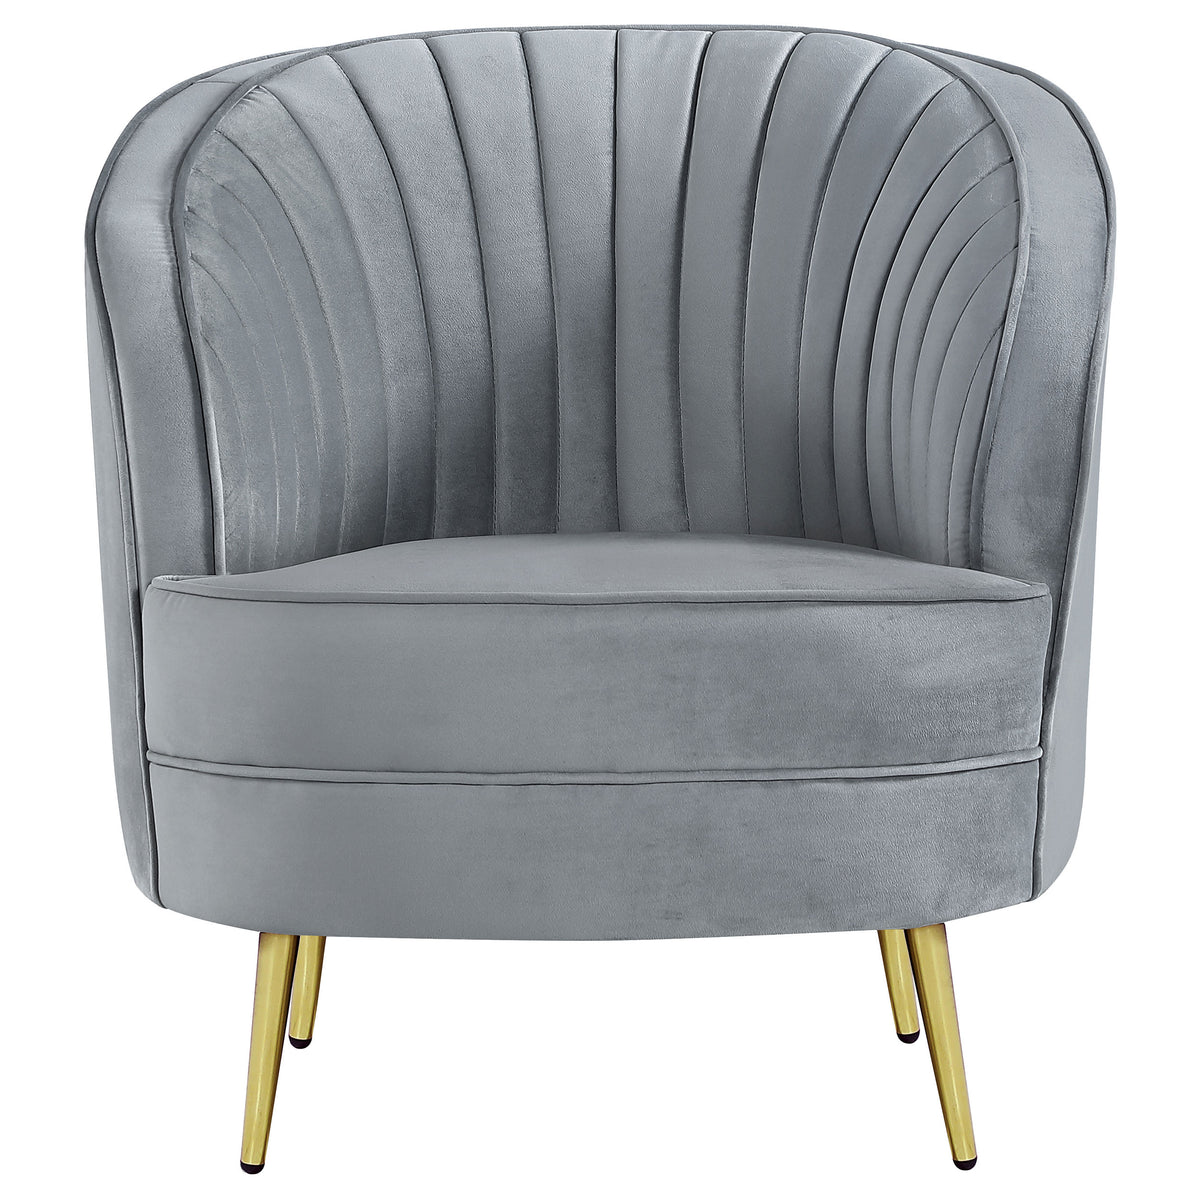 Sophia Upholstered Chair Grey and Gold  Half Price Furniture